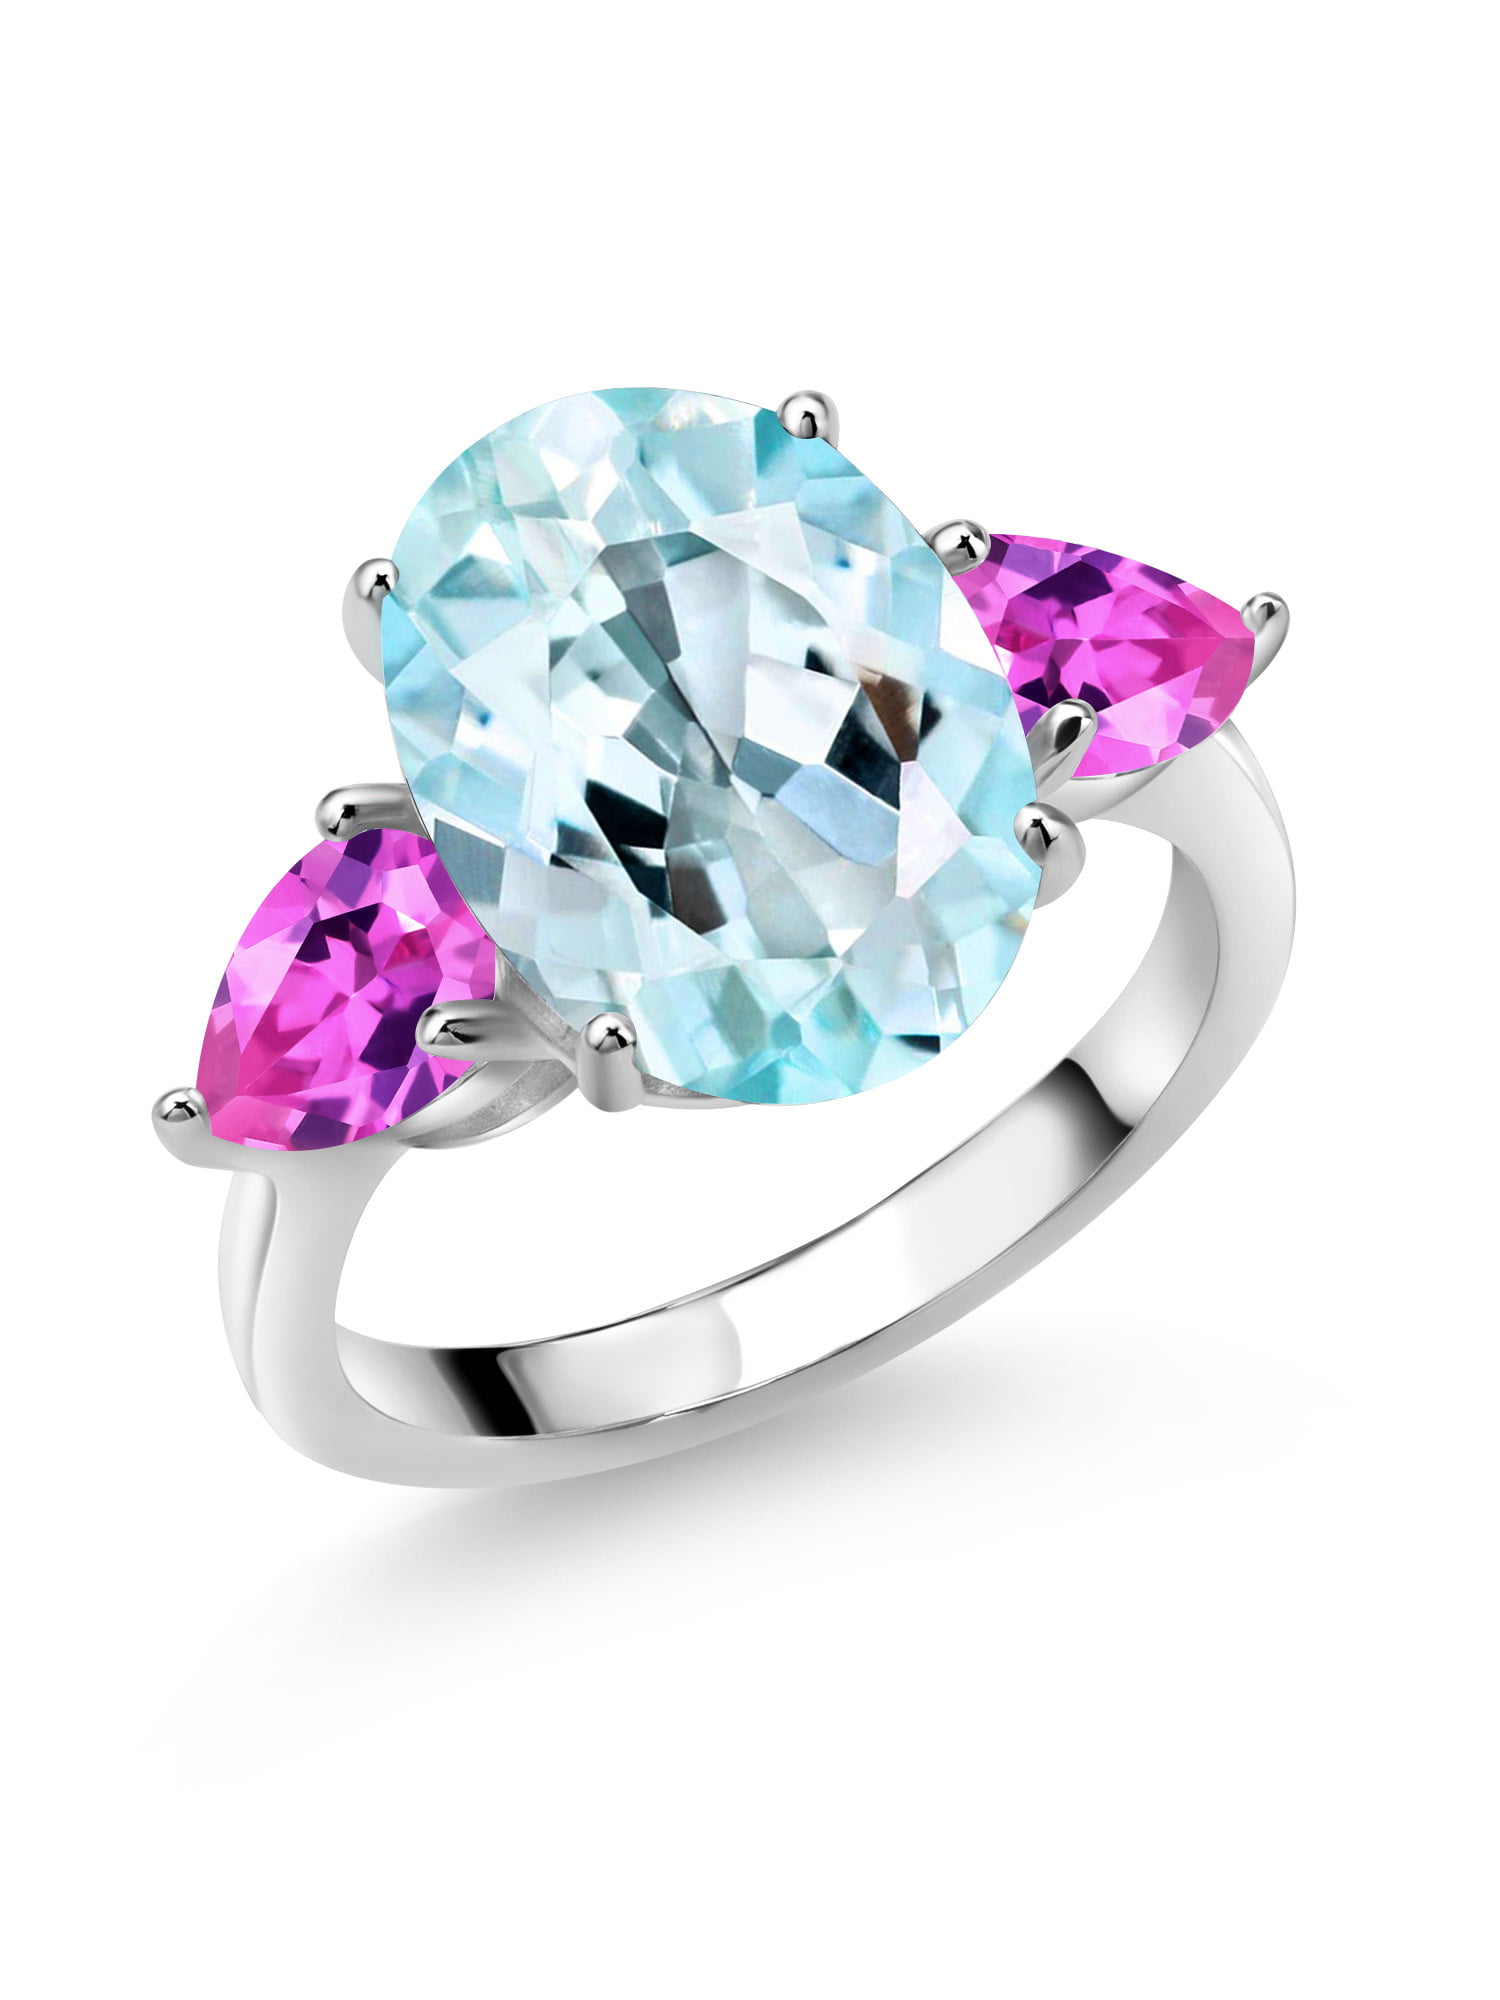 Gem Stone King 925 Sterling Silver Sky Blue Topaz and Pink Created